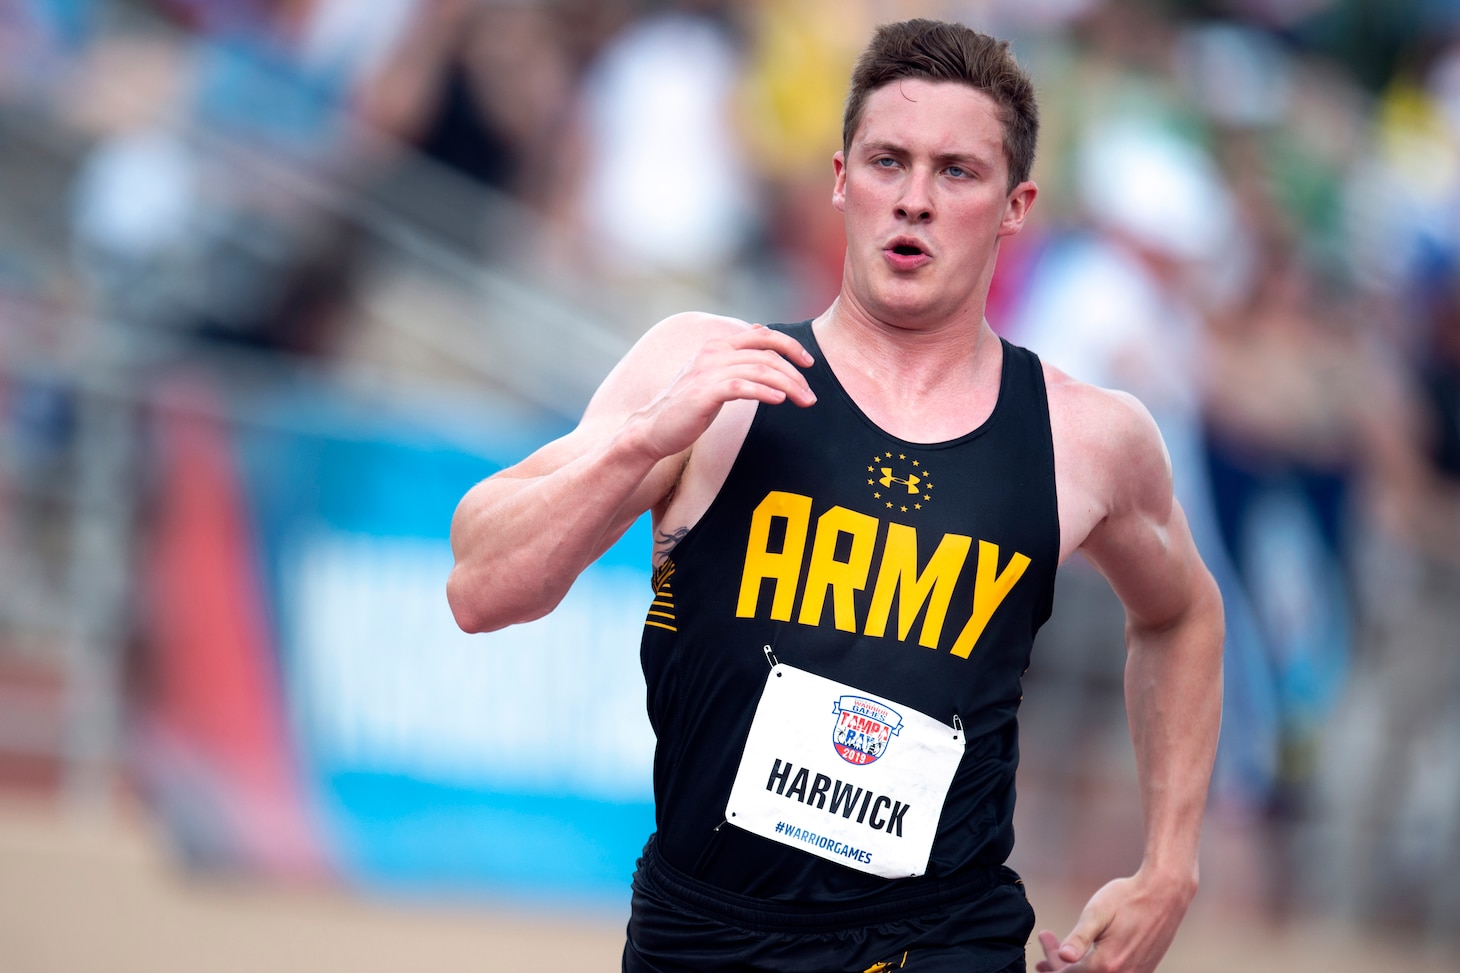 A male runner wearing a black Army shirt sprints during the Warrior Games.